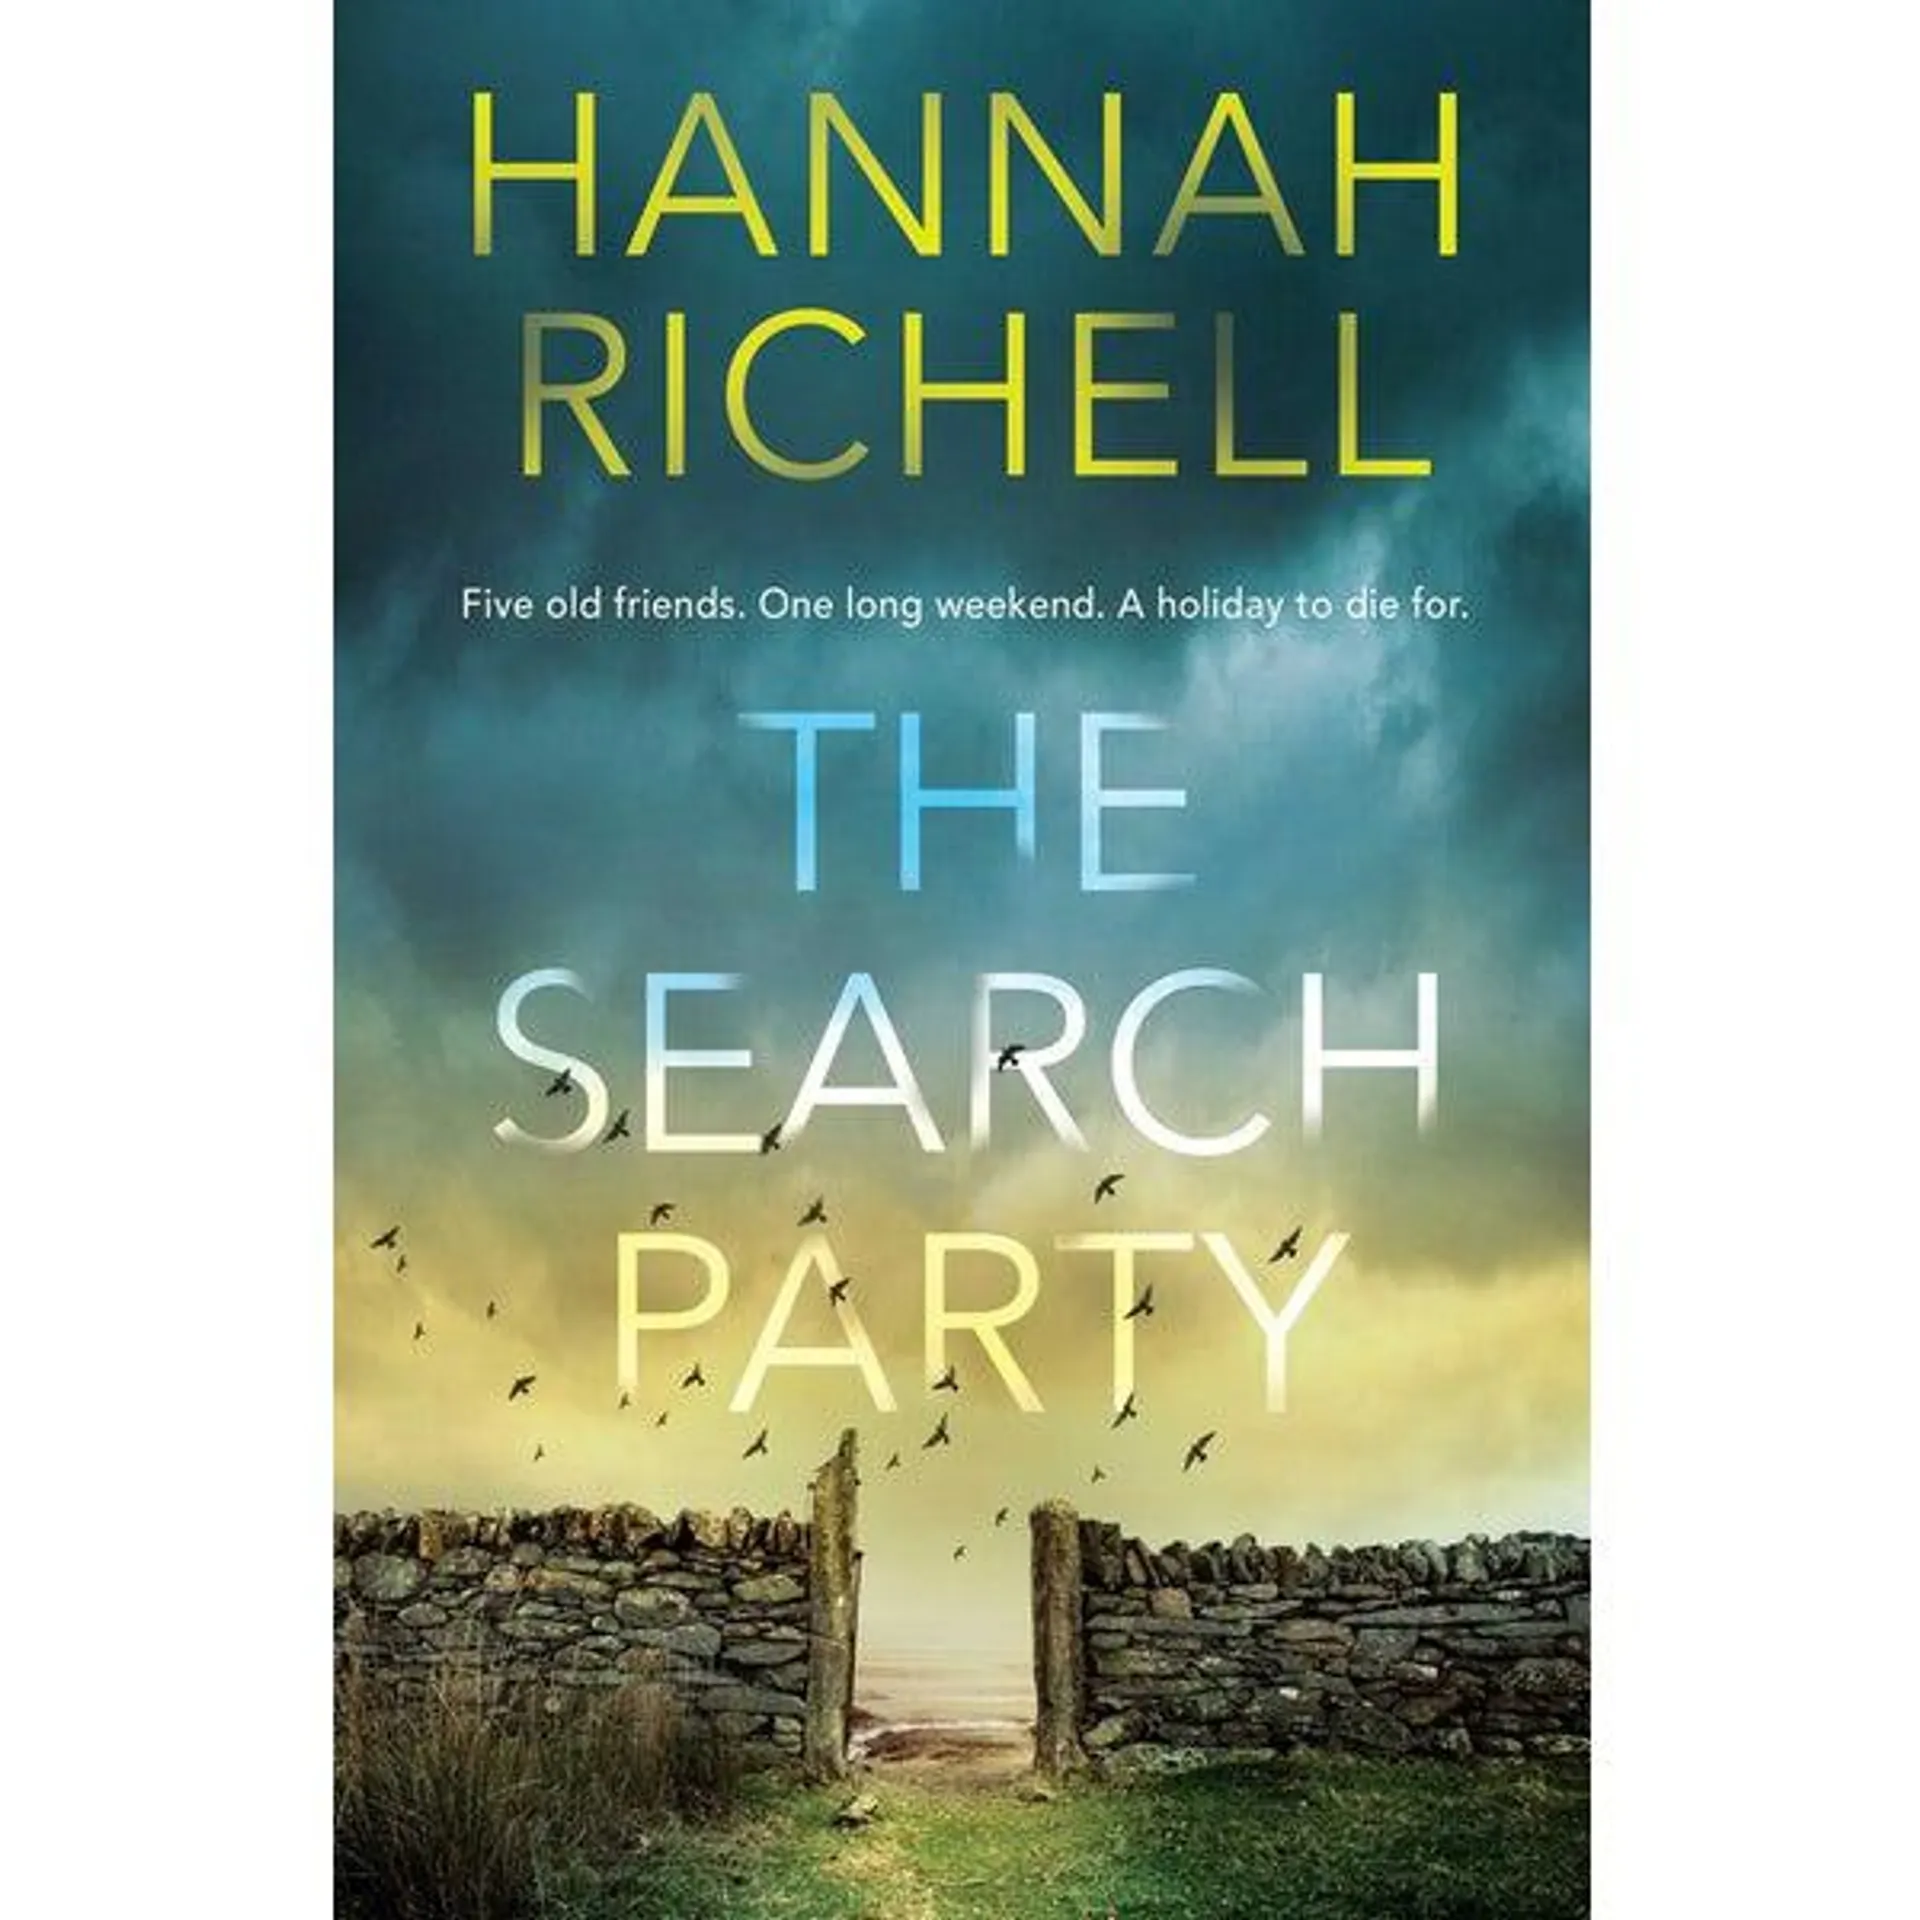 The Search Party Trade Paperback